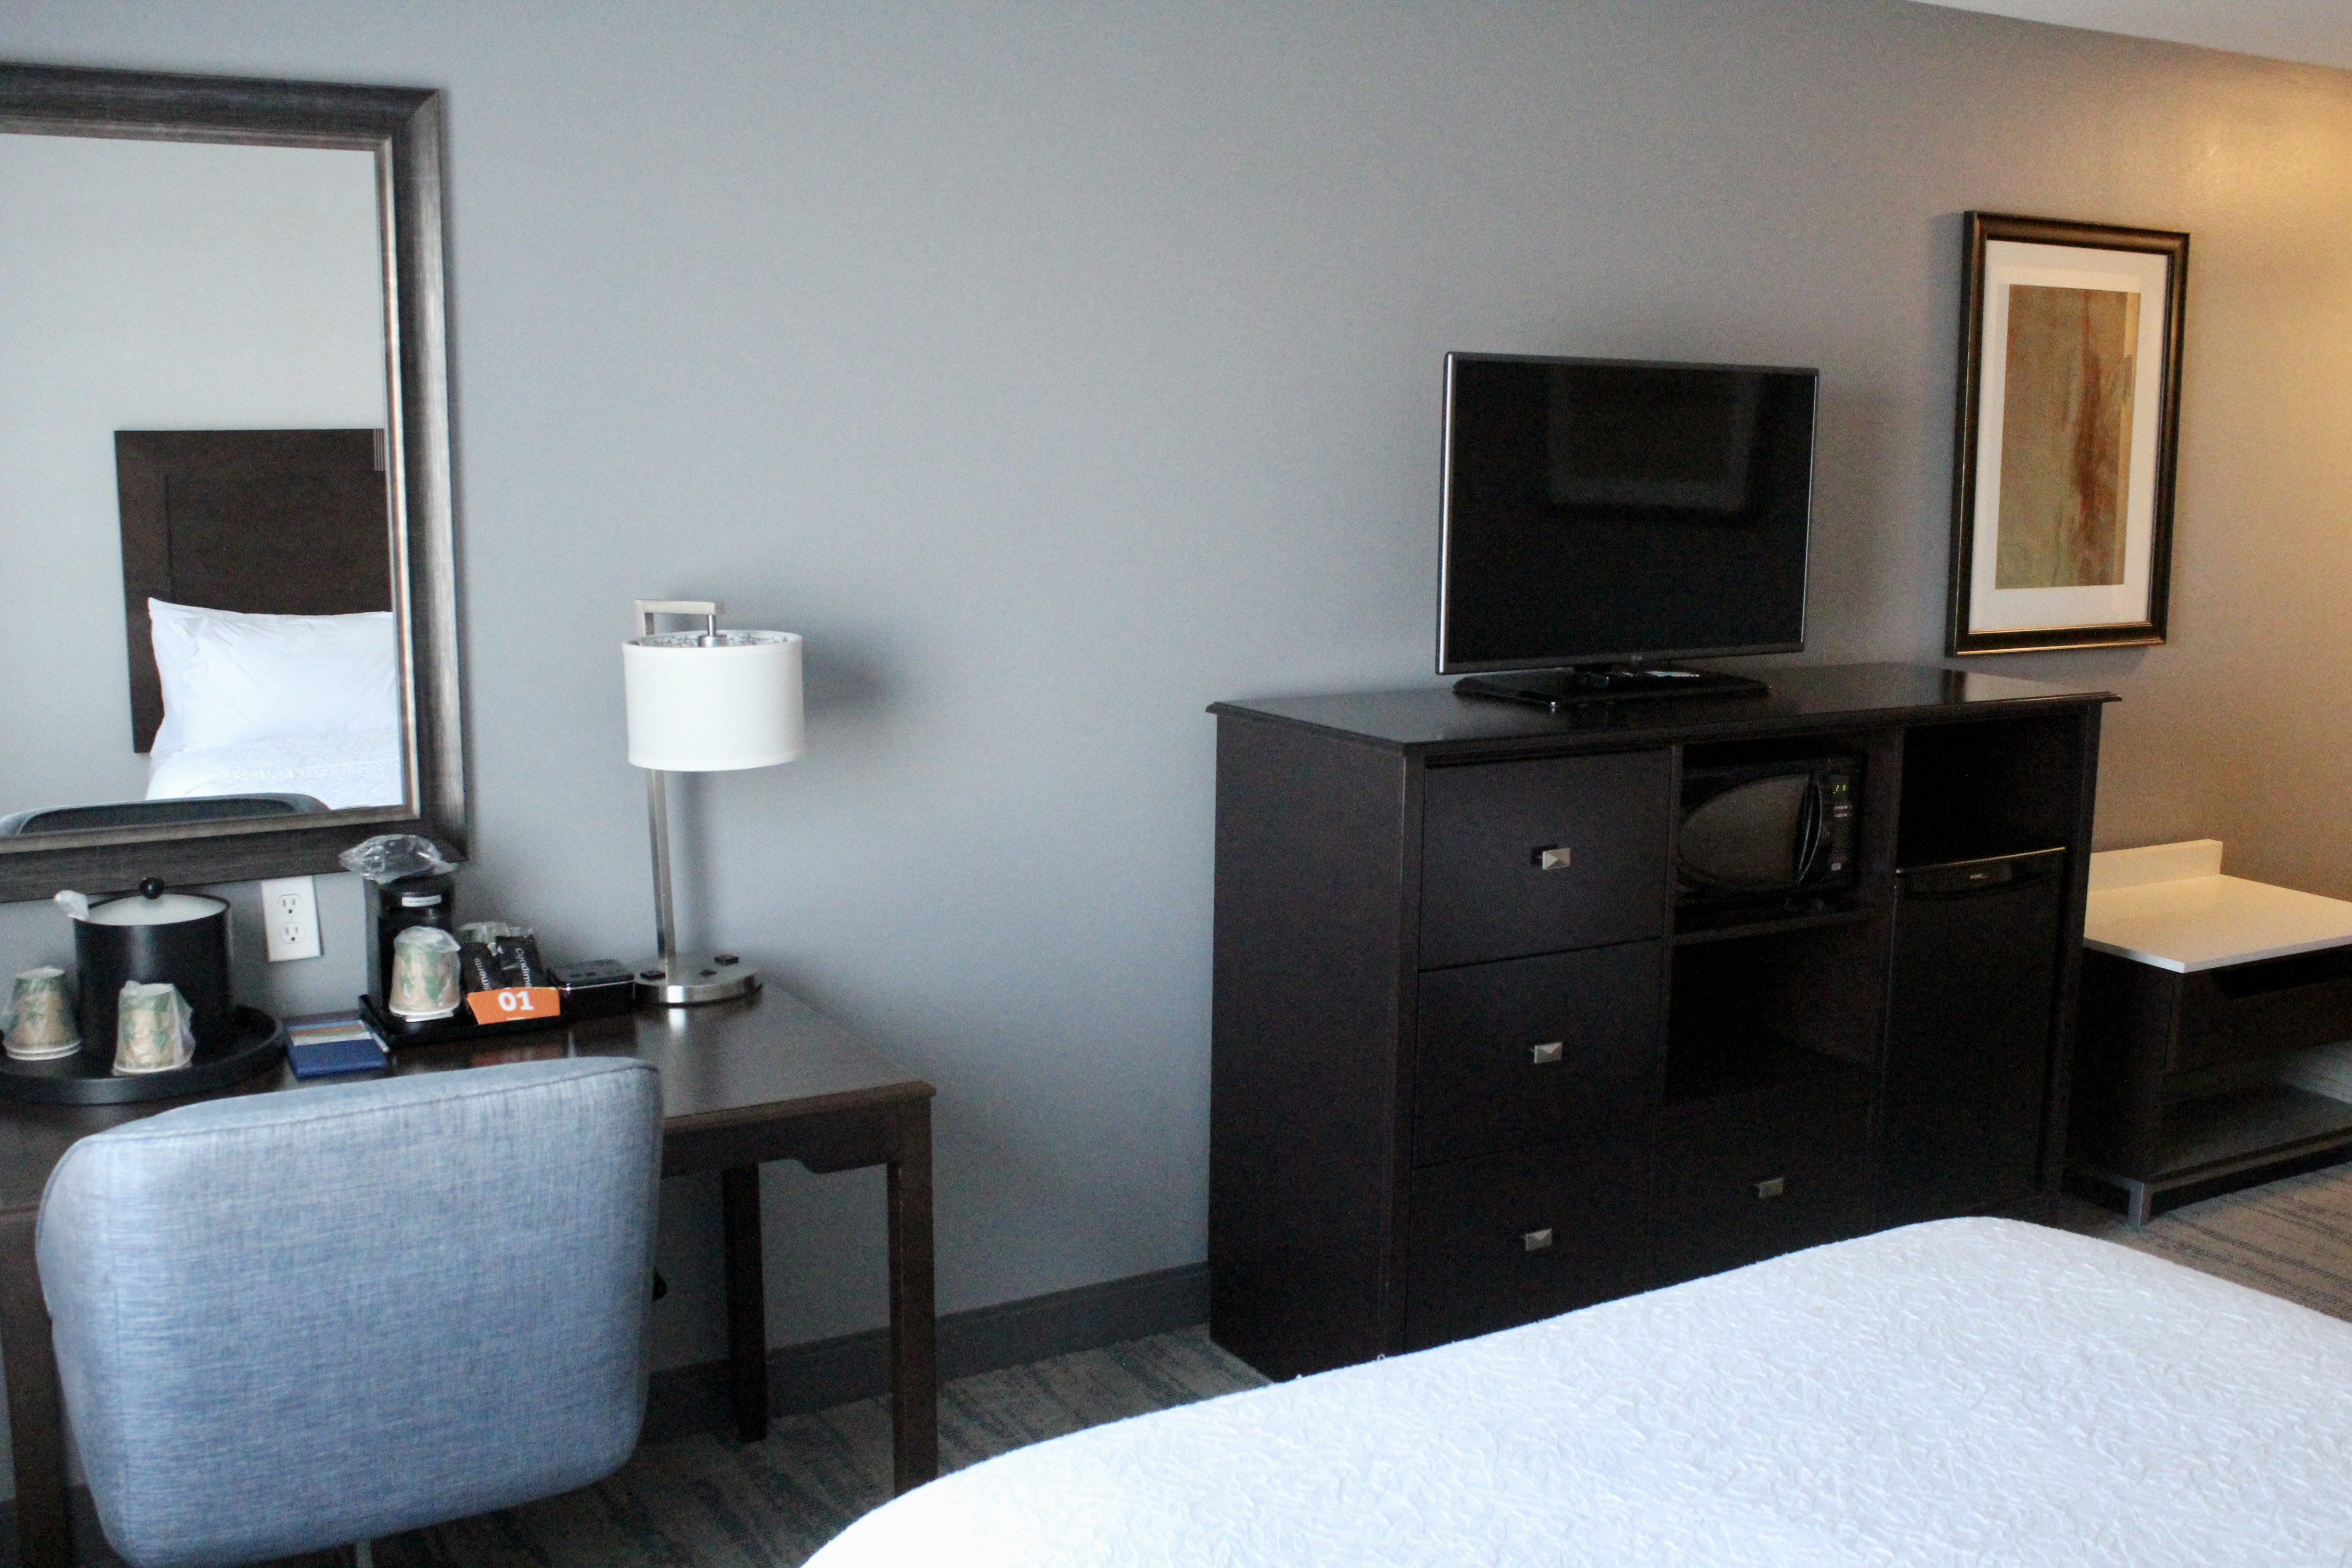 Guest Room Amenities like Microwave HDTV and Desk Area with Mirror